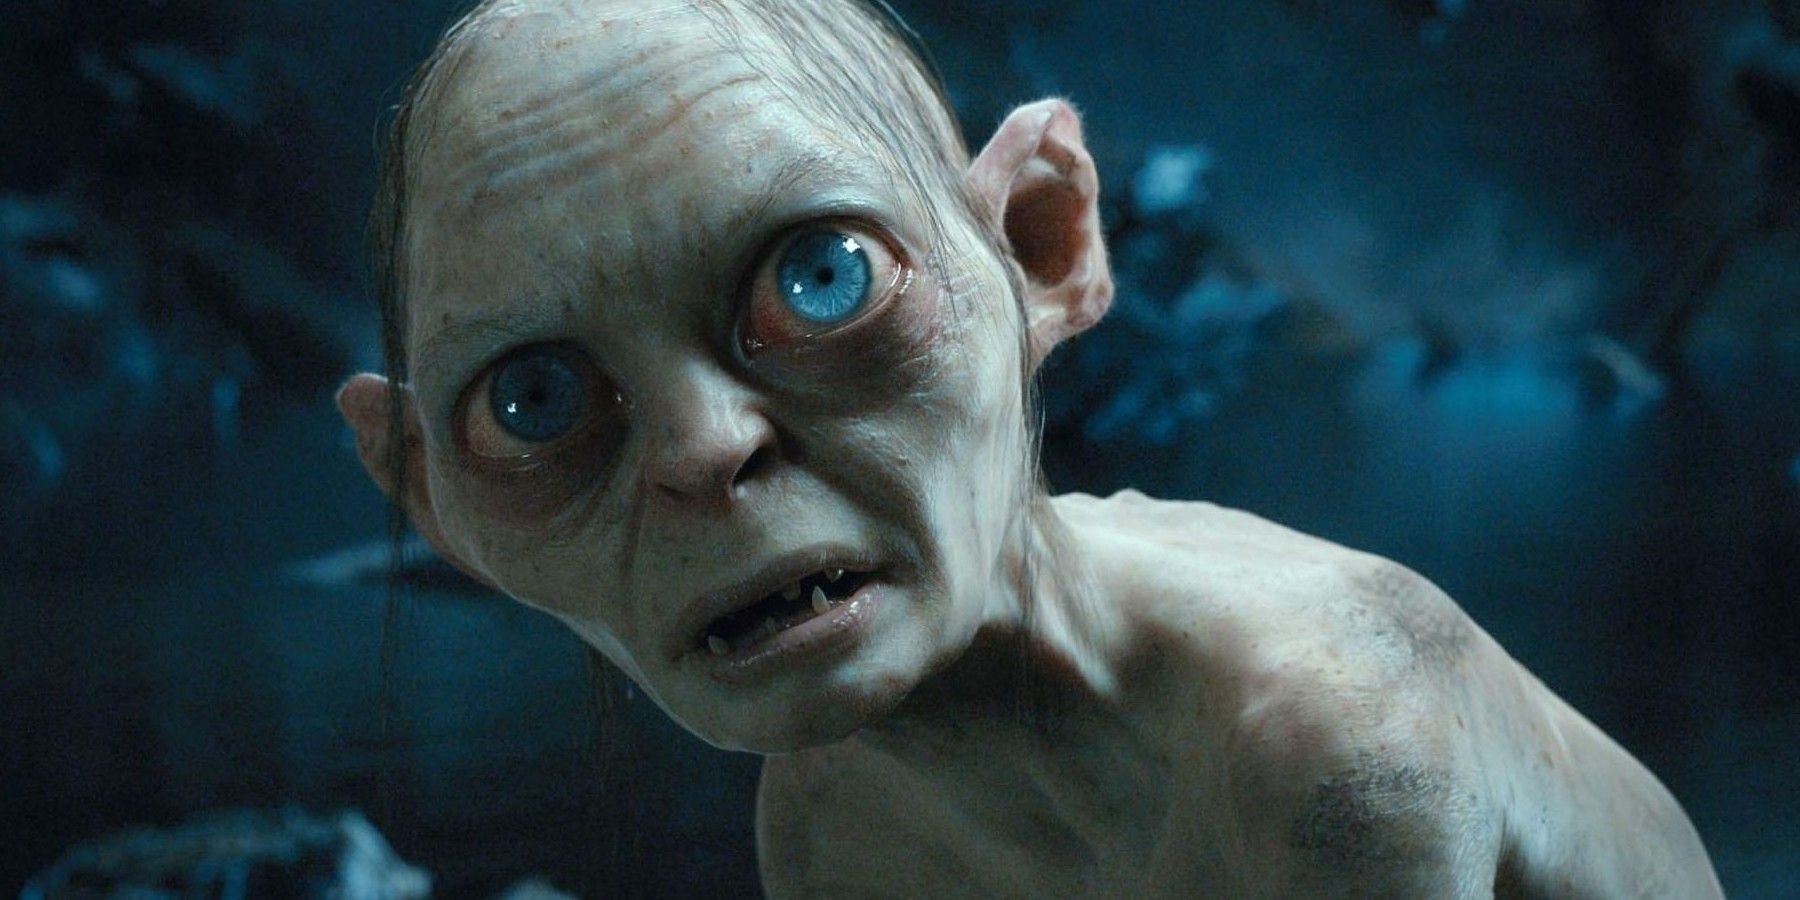 Watch Lord Of The Rings' Hobbit Actors Attempt Gollum's Voice